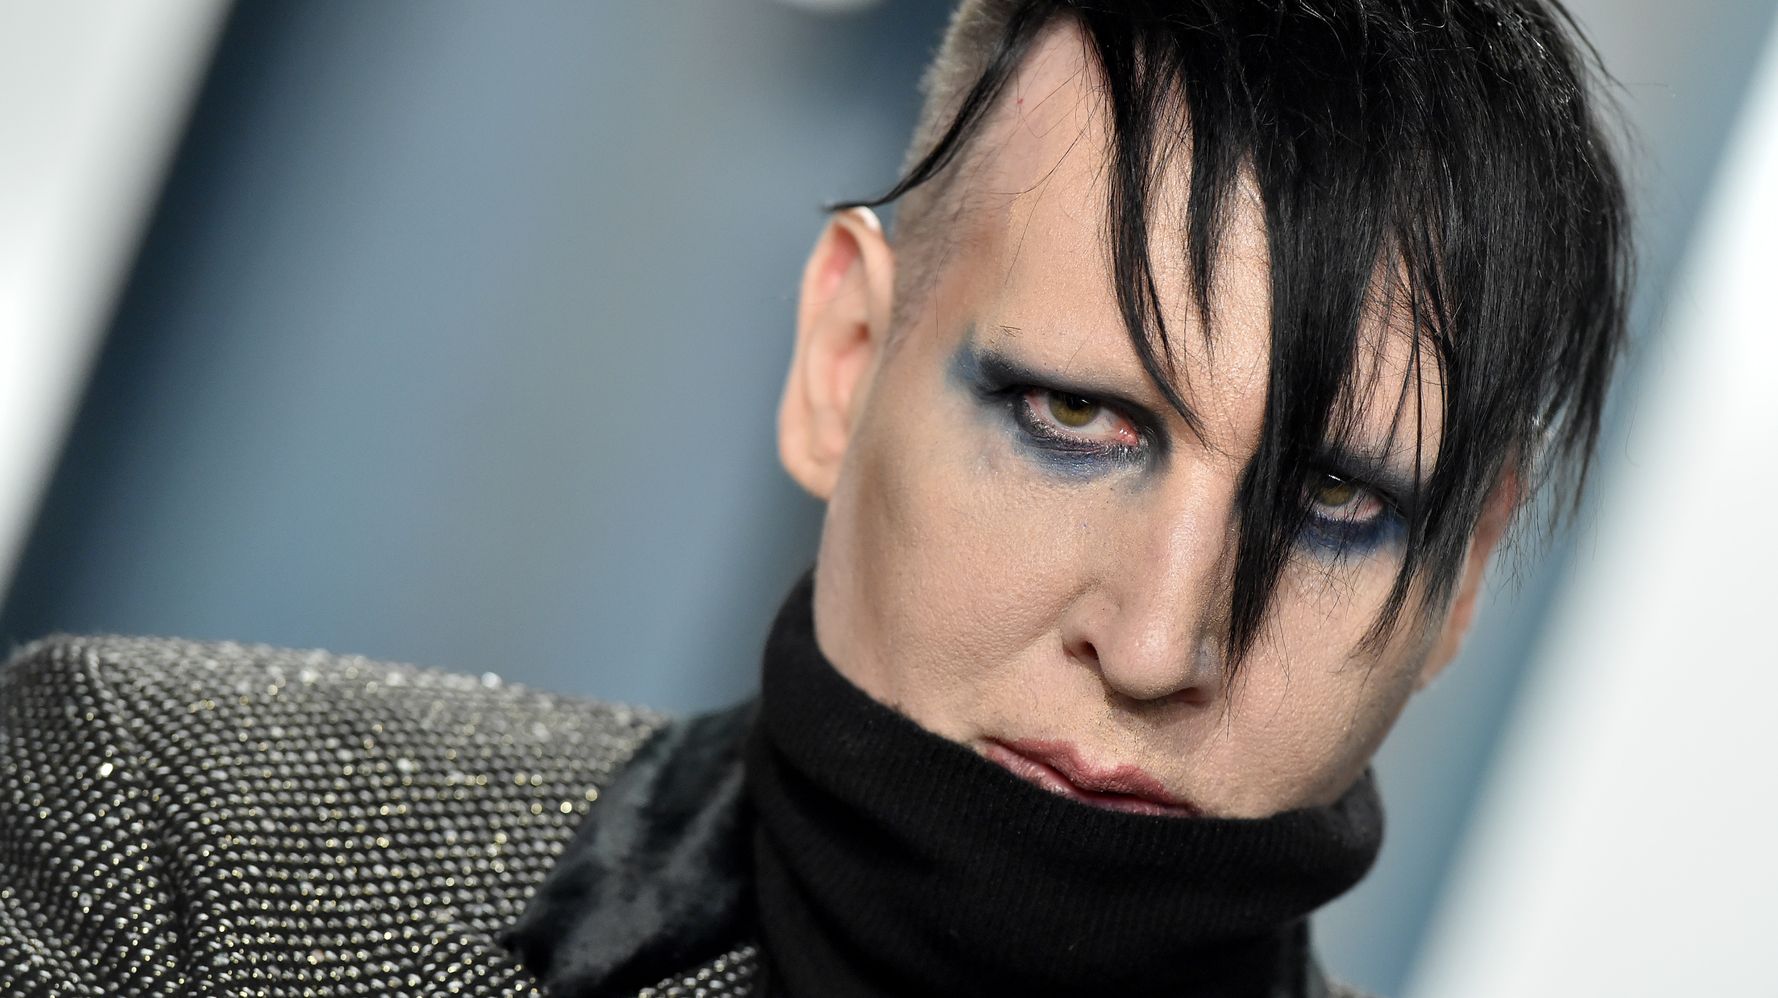 LA Sheriffs Investigating Domestic Violence Claims Against Marilyn Manson